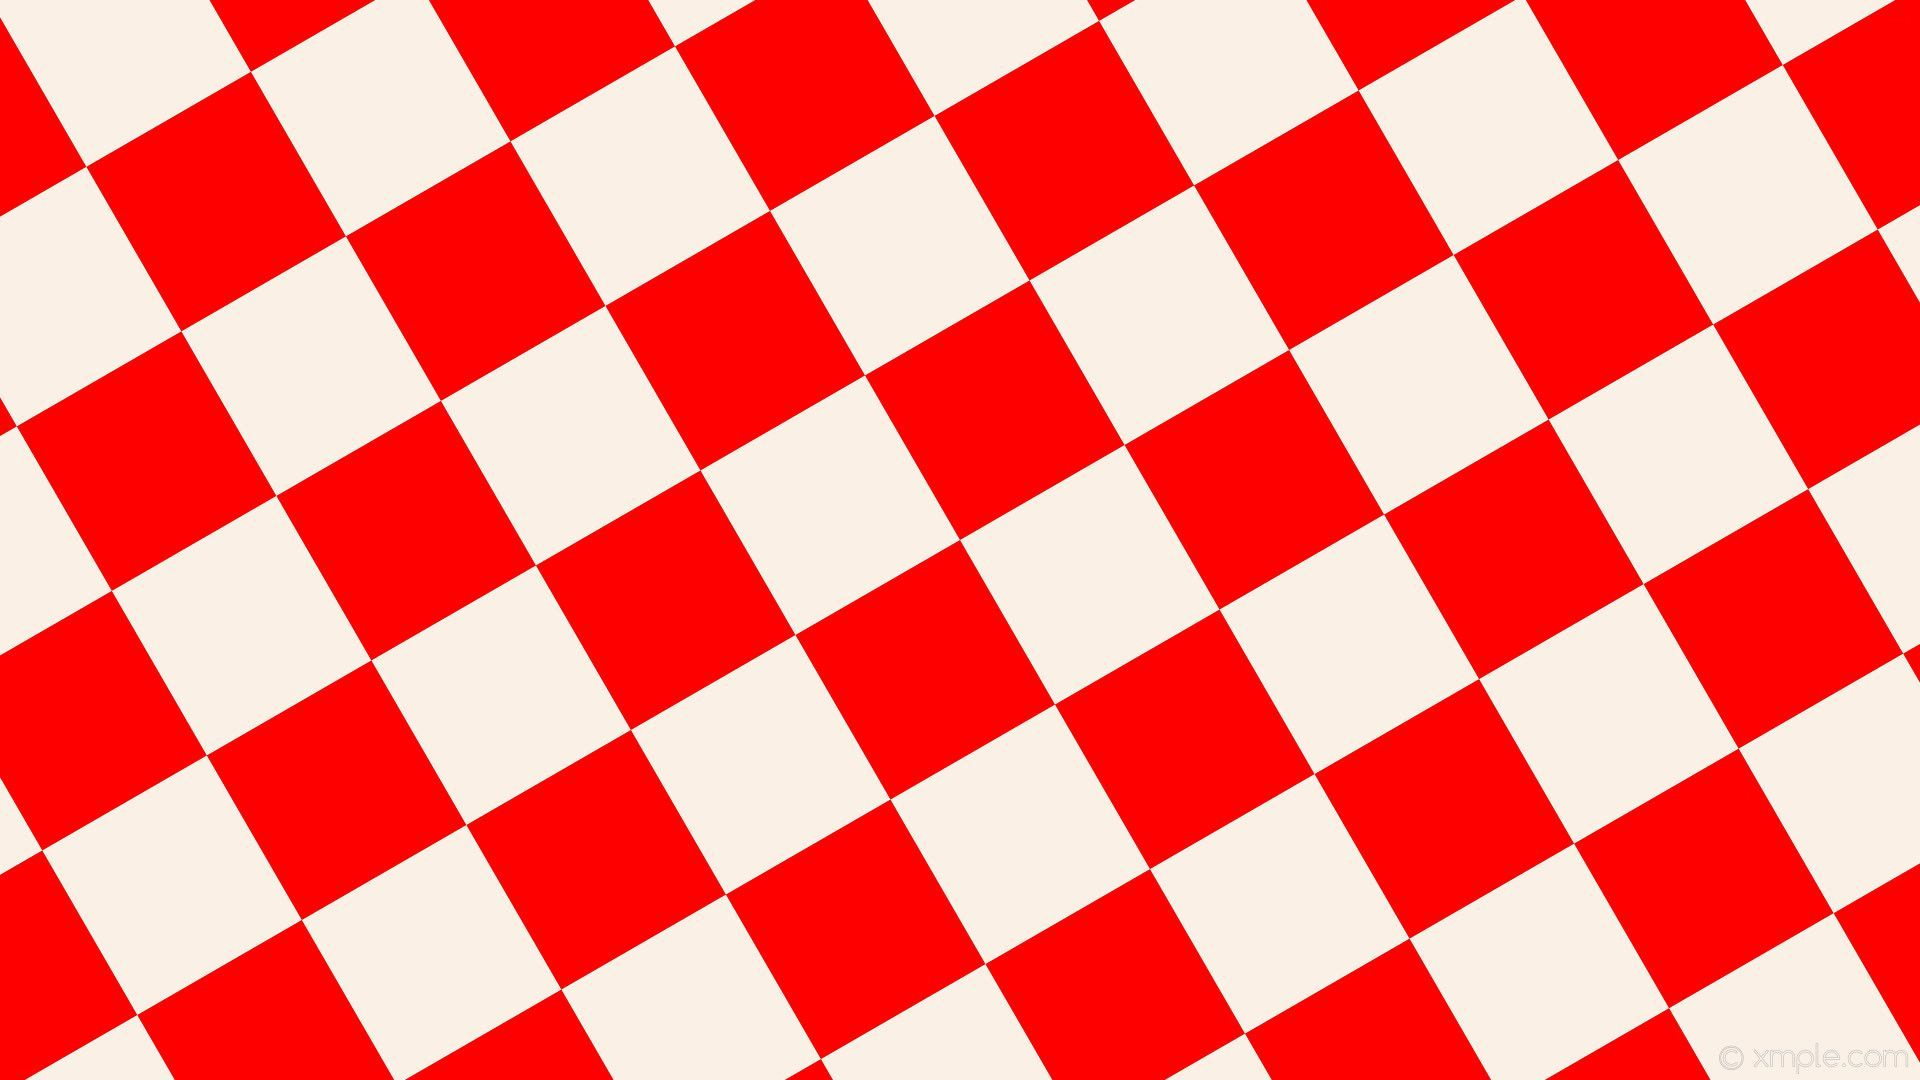 1920x1080 Red and White Checkered Wallpapers Top Free Red and White Checkered Backgrounds